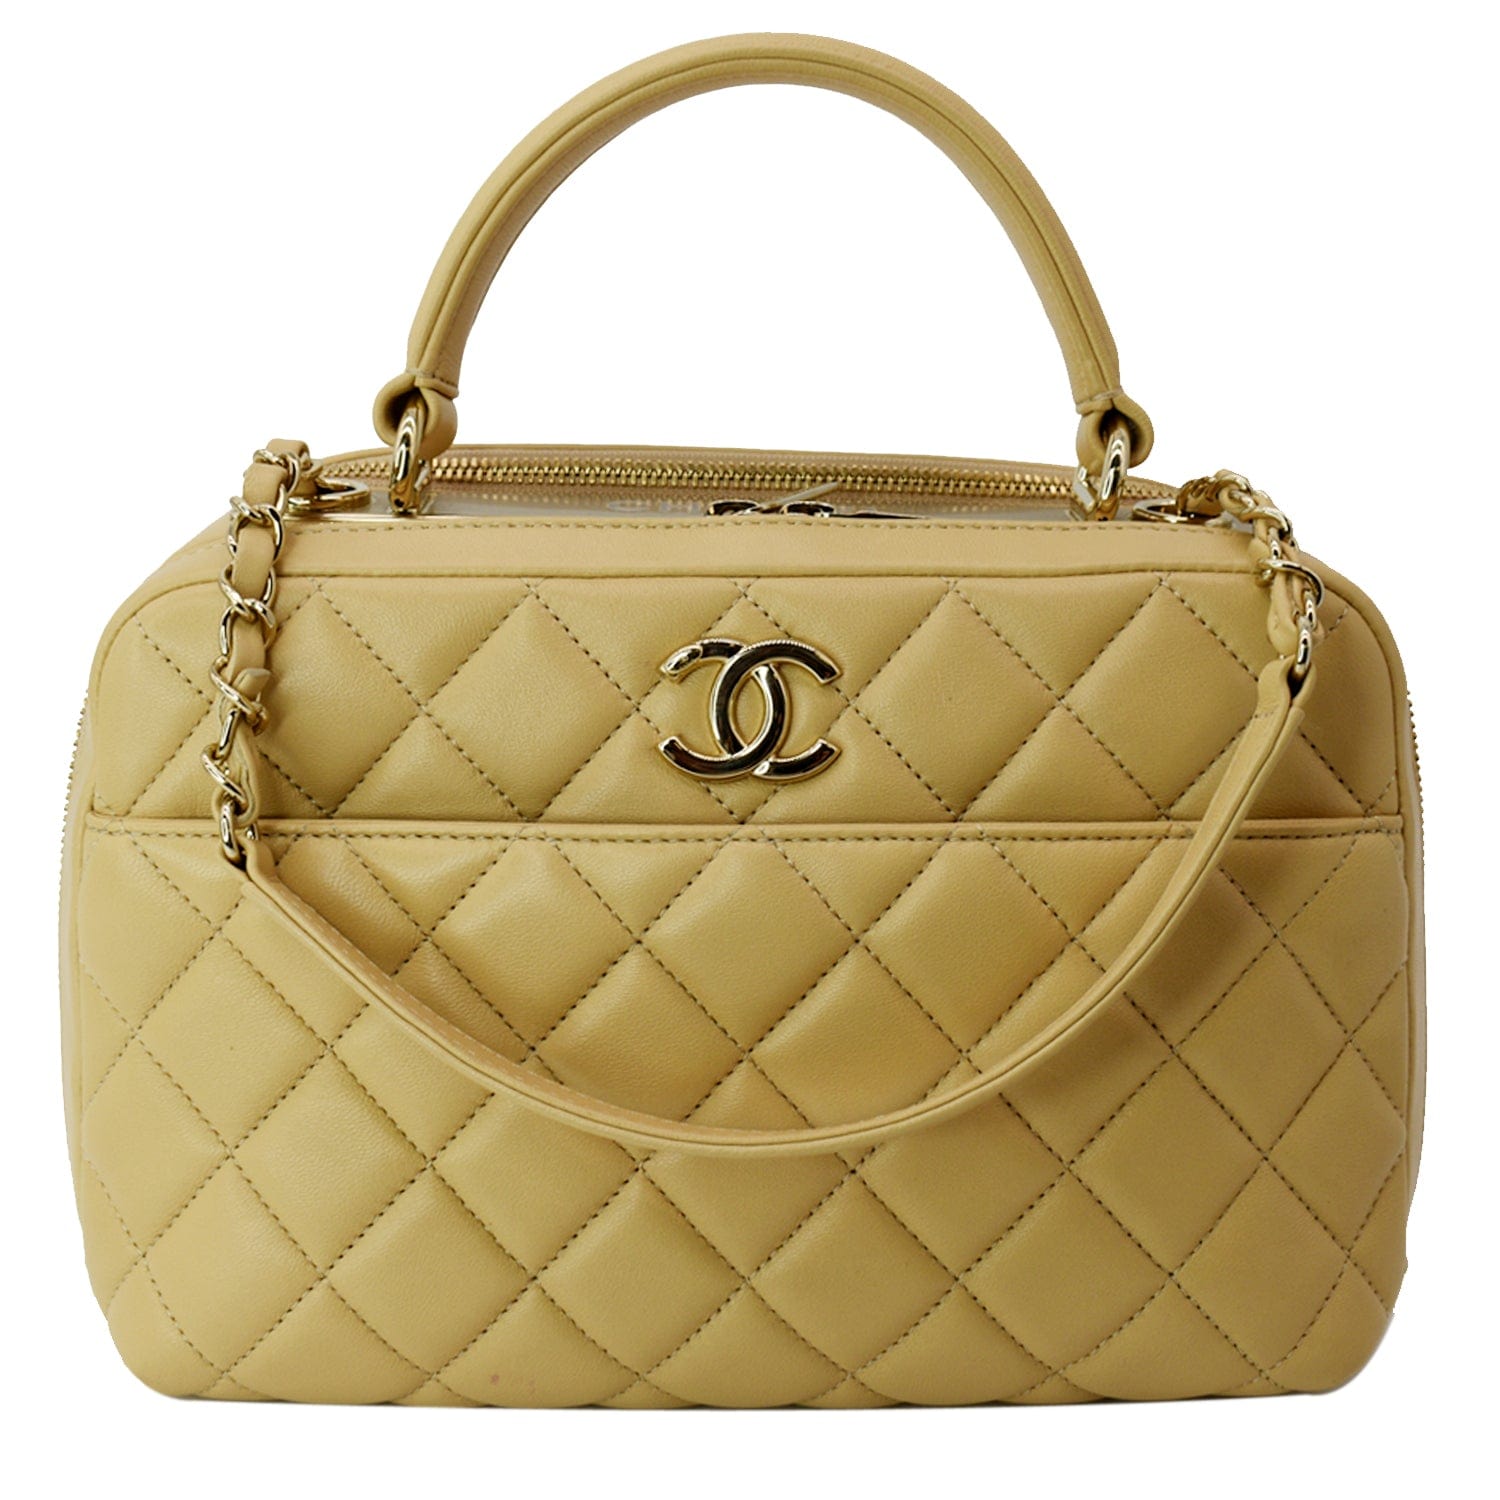 Trendy cc top handle leather handbag Chanel Beige in Leather - 24573671